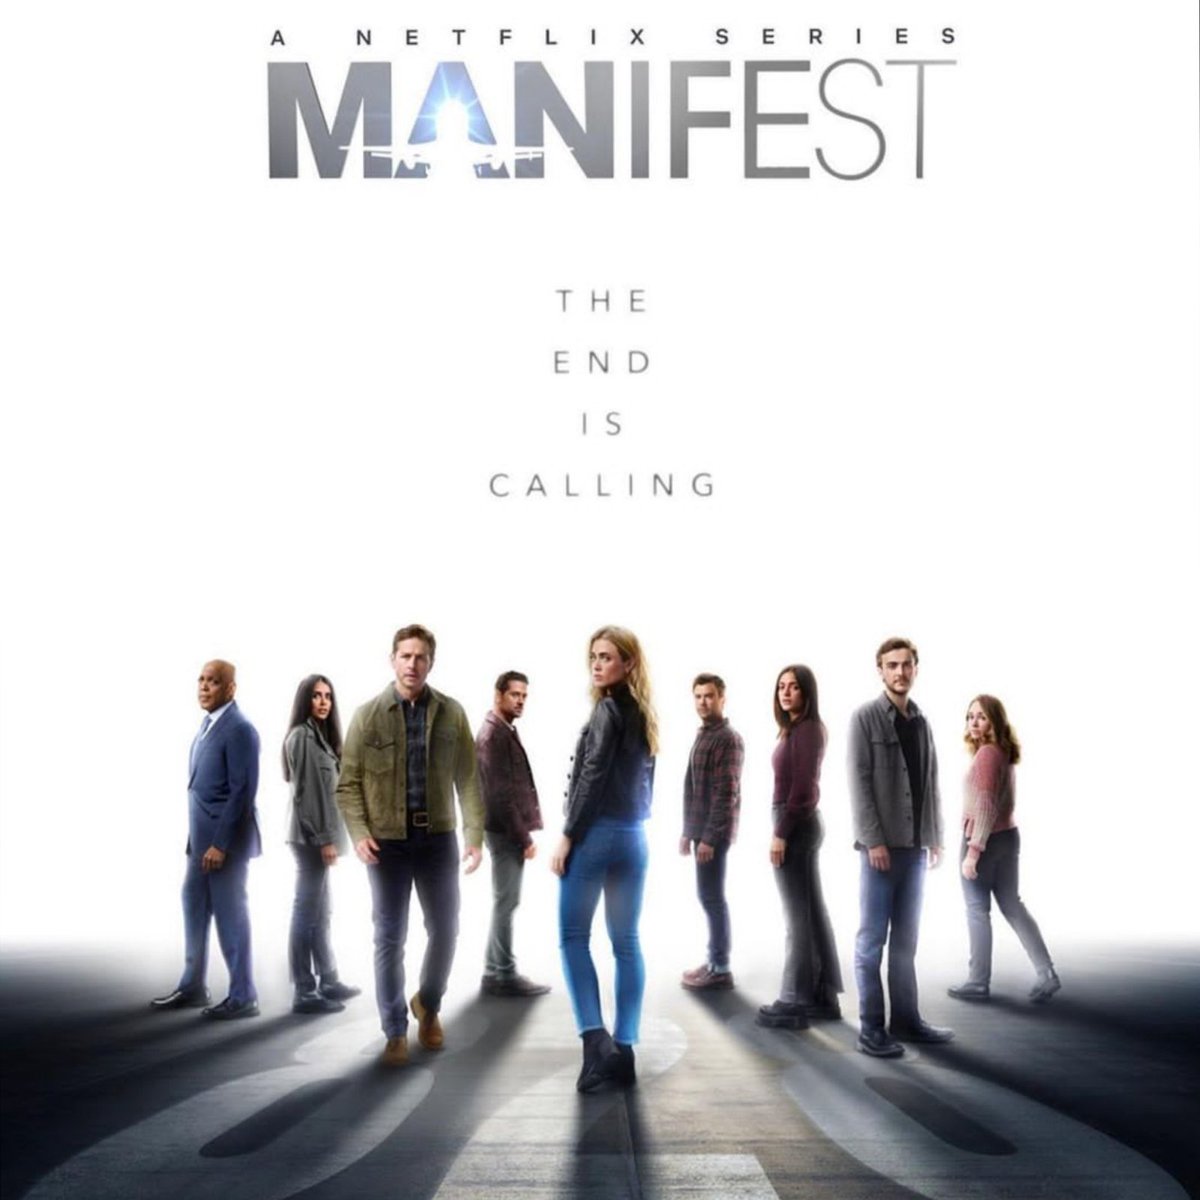 When I say I am in tears I am in tears manifest is a wonderful series everything that happened from the plot and the ending just made a whole lot of sense I wanted more but I feel like their journey is complete ❤
#Manifest #SeriesFinale #ItsAllConnected